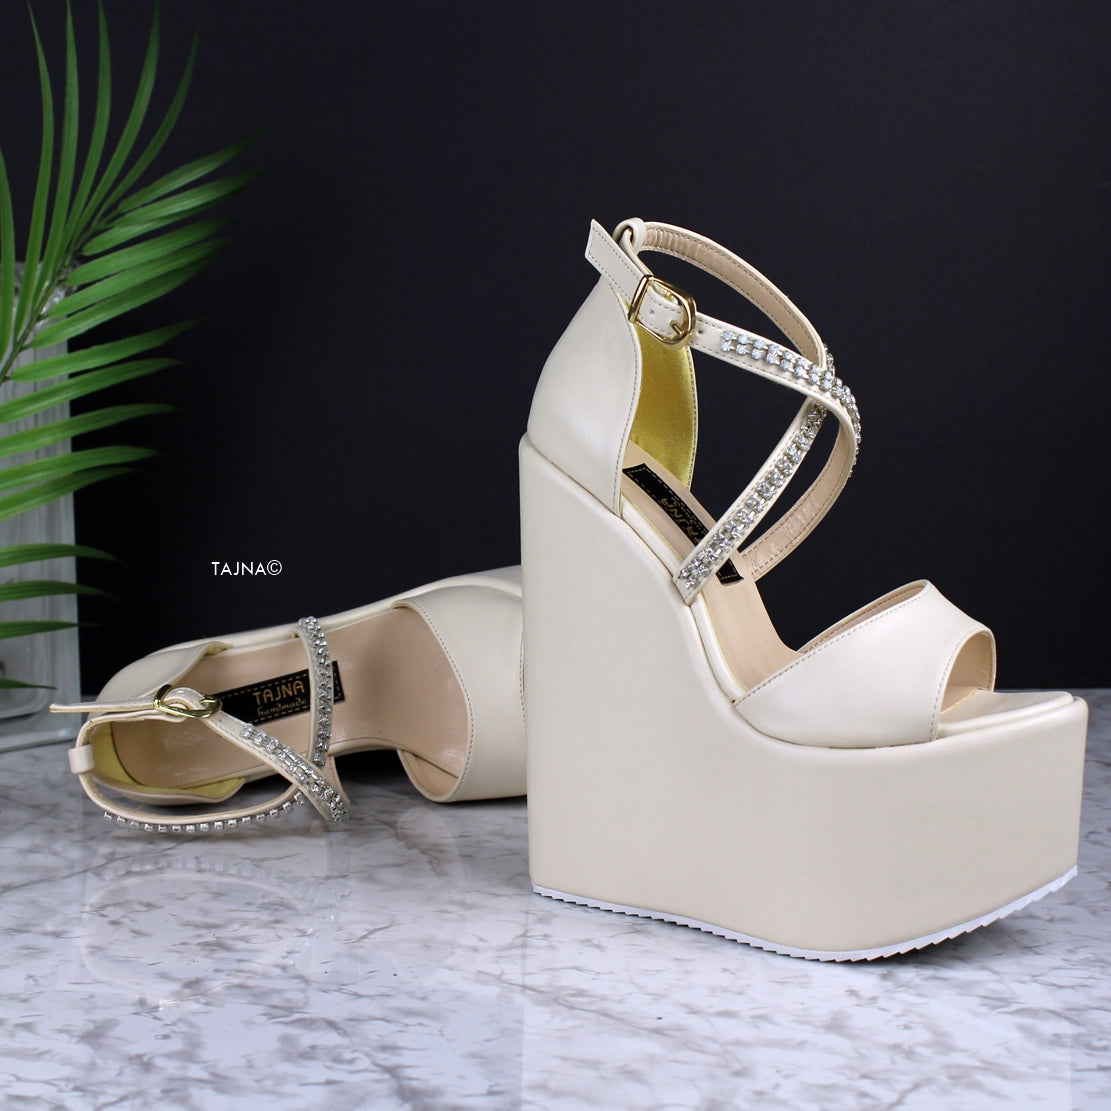 New Arrival #Heels For Brides/Beautiful Designer pencil heels for weddings/parties/and  Officewear | Heels, Pencil heels, Beautiful bride